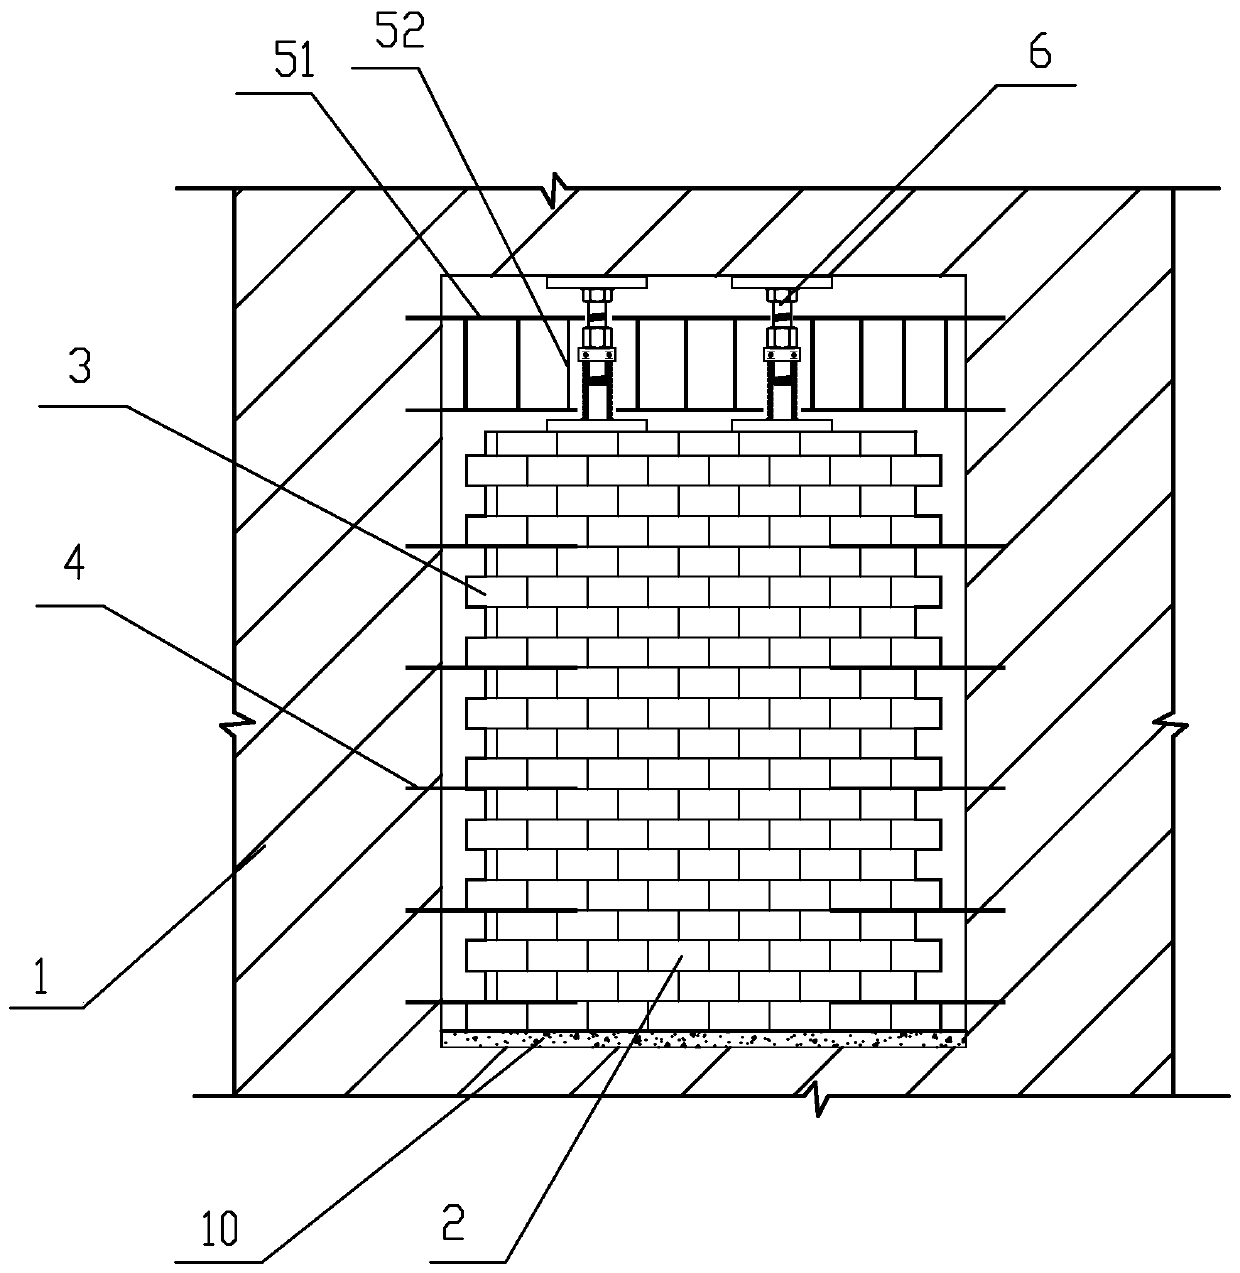 A Restoration Construction Method of Pre-roofing by Opening Hole of Broken Wall of Masonry Structure